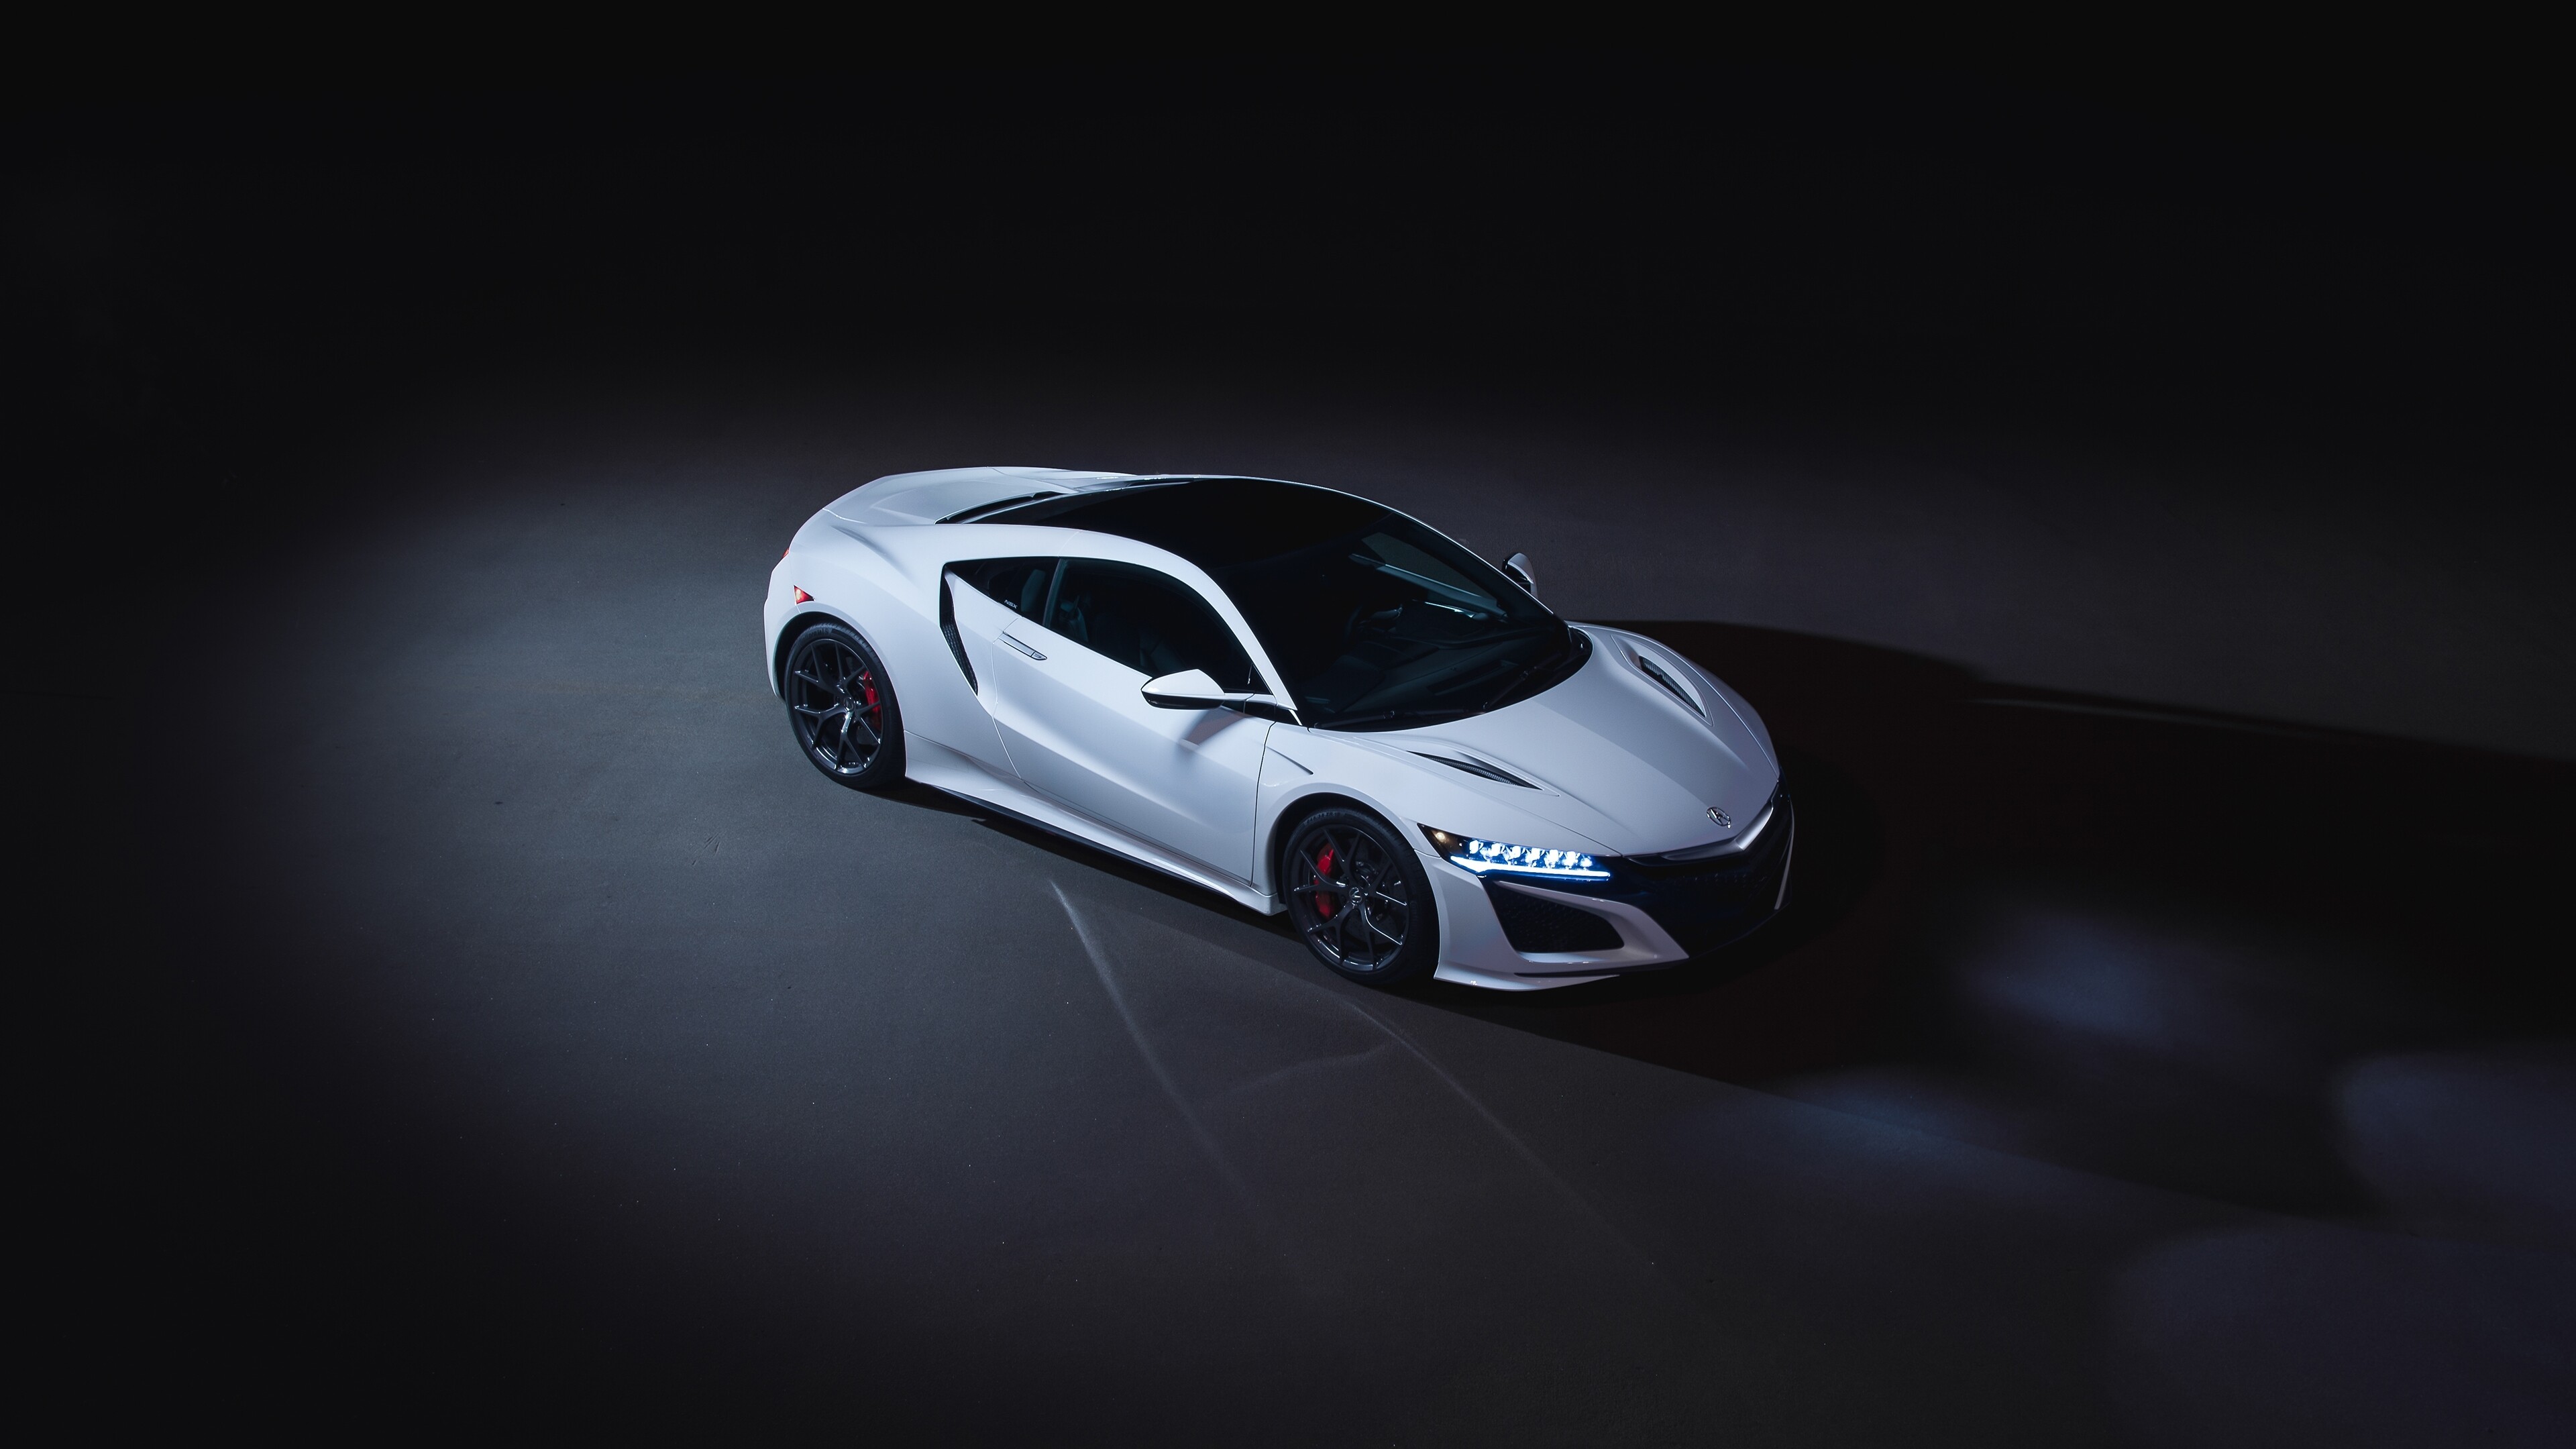 Acura: The first Japanese luxury automaker, NSX. 3840x2160 4K Wallpaper.